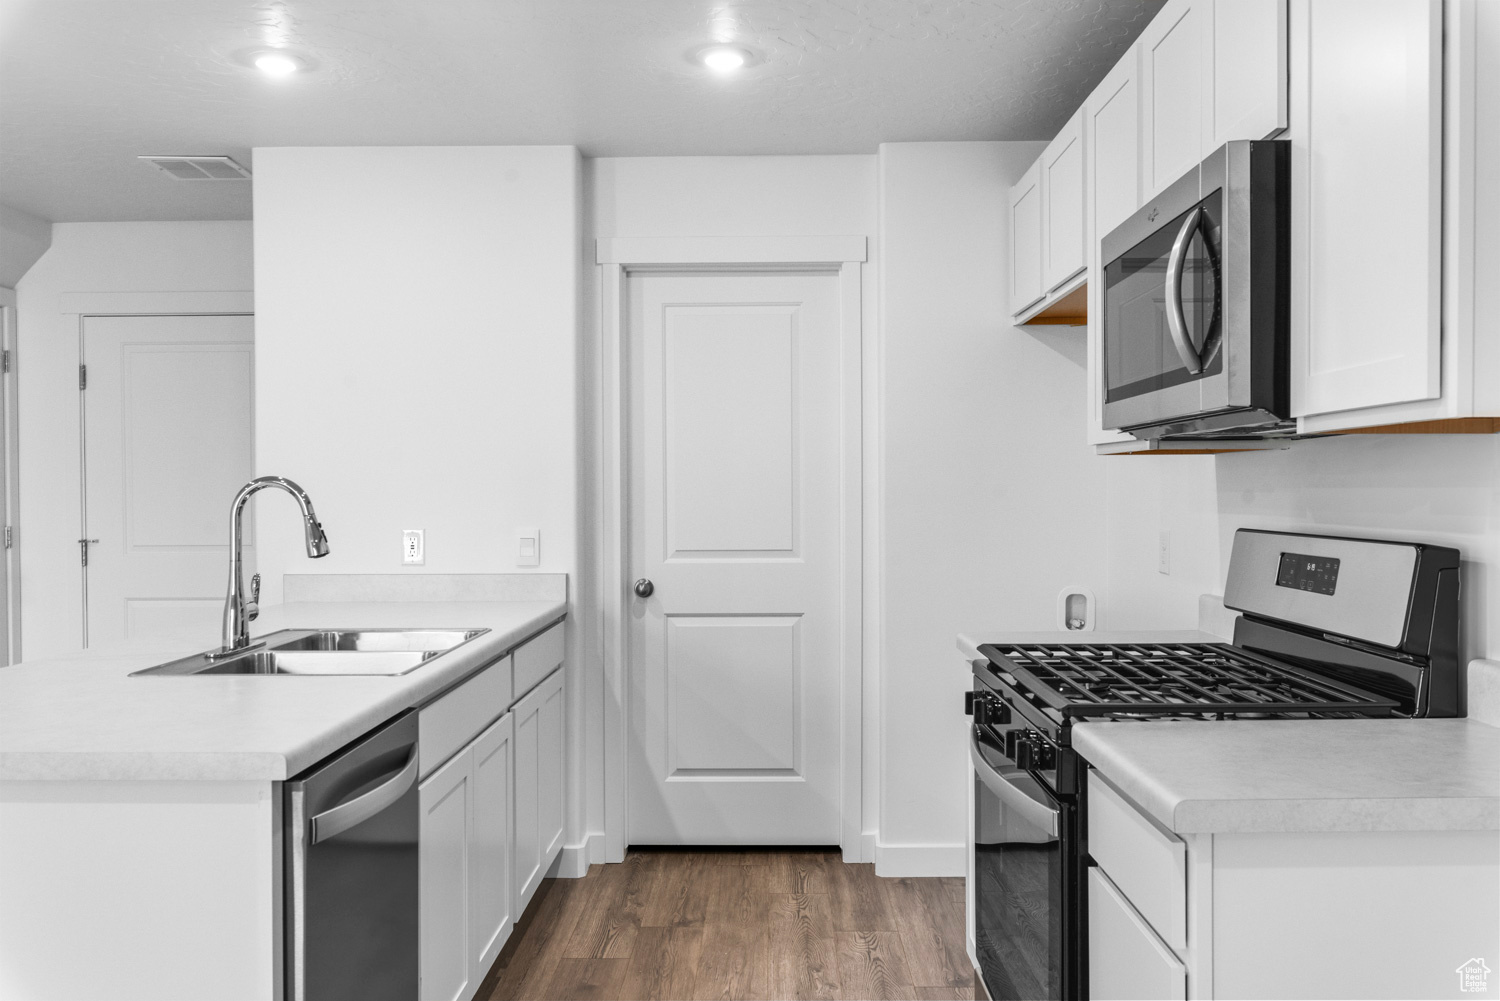 Kitchen with white cabinets, sink, stainless steel appliances, and dark wood-type flooring